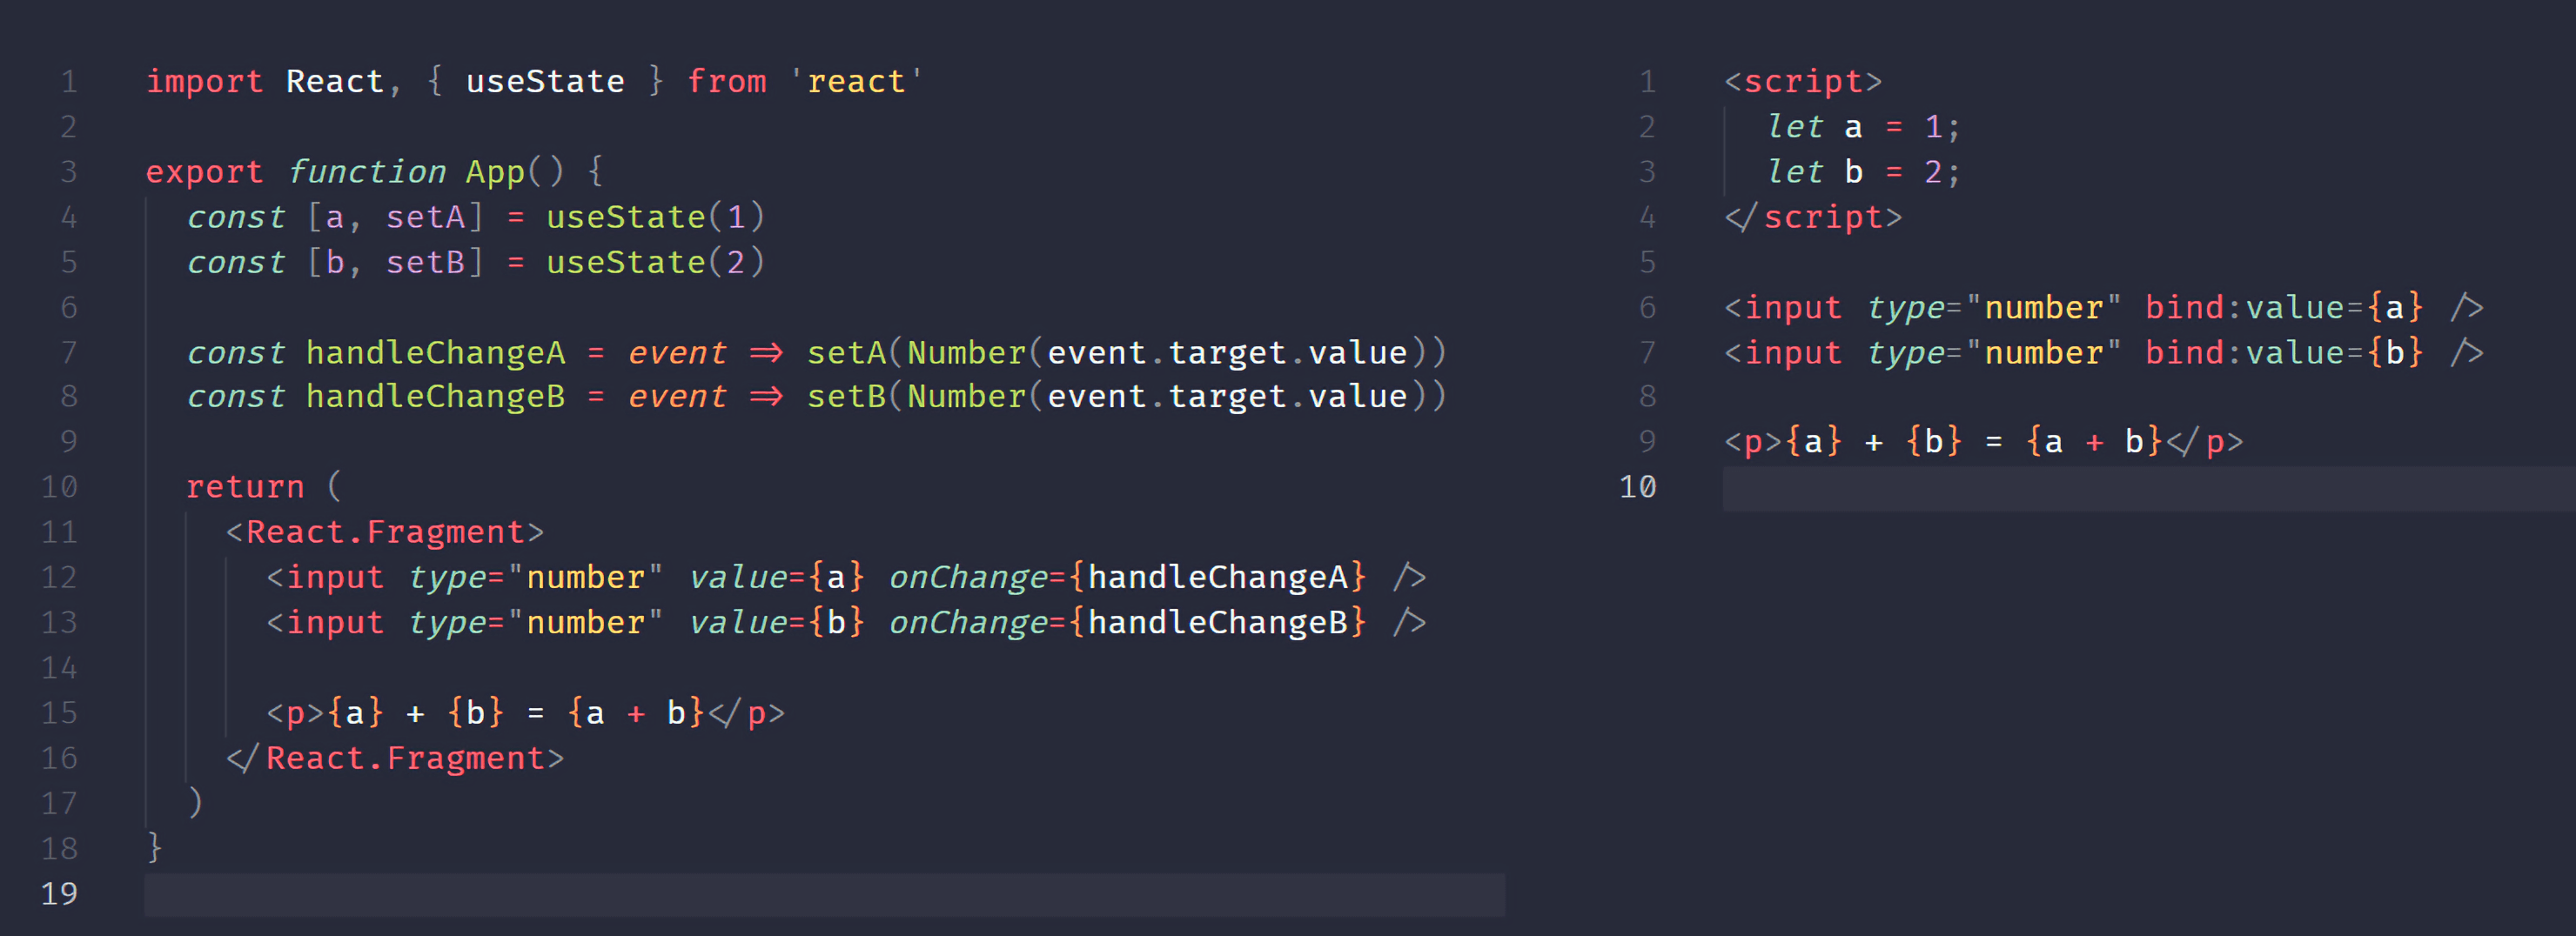 React component on the left, Svelte component on the right